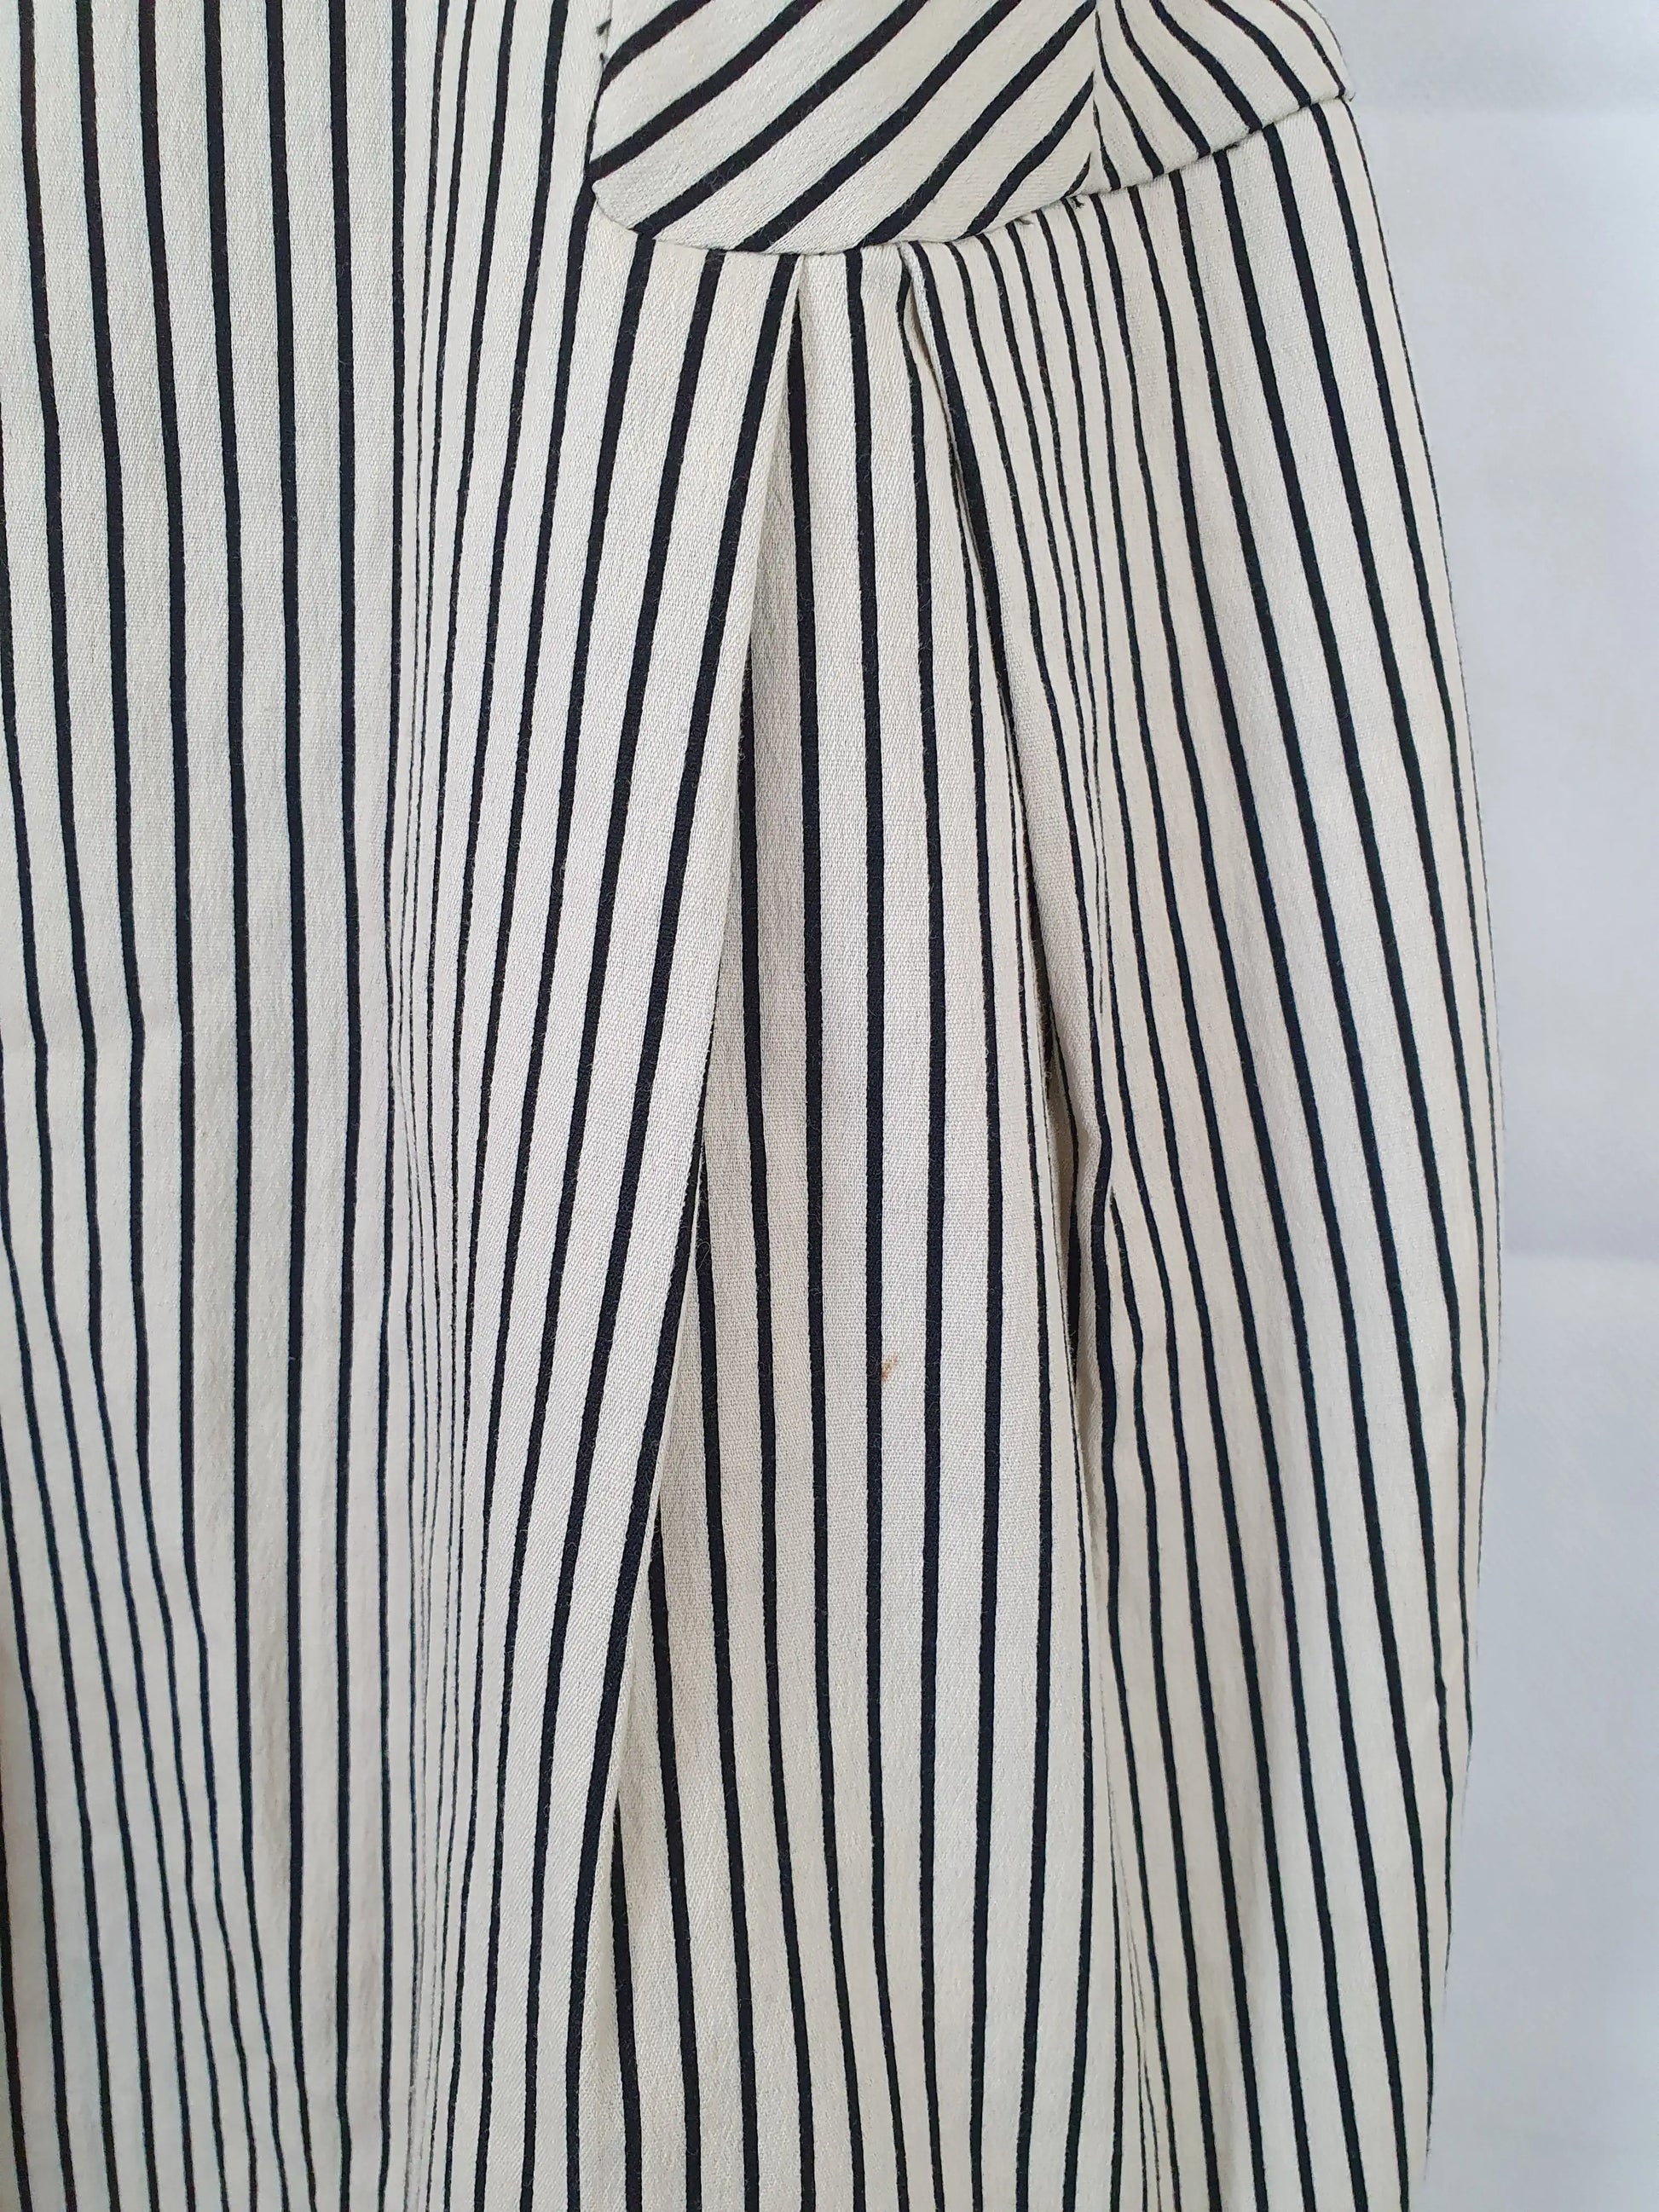 Cue Striped Office Midi Dress Size 6 by SwapUp-Second Hand Shop-Thrift Store-Op Shop 